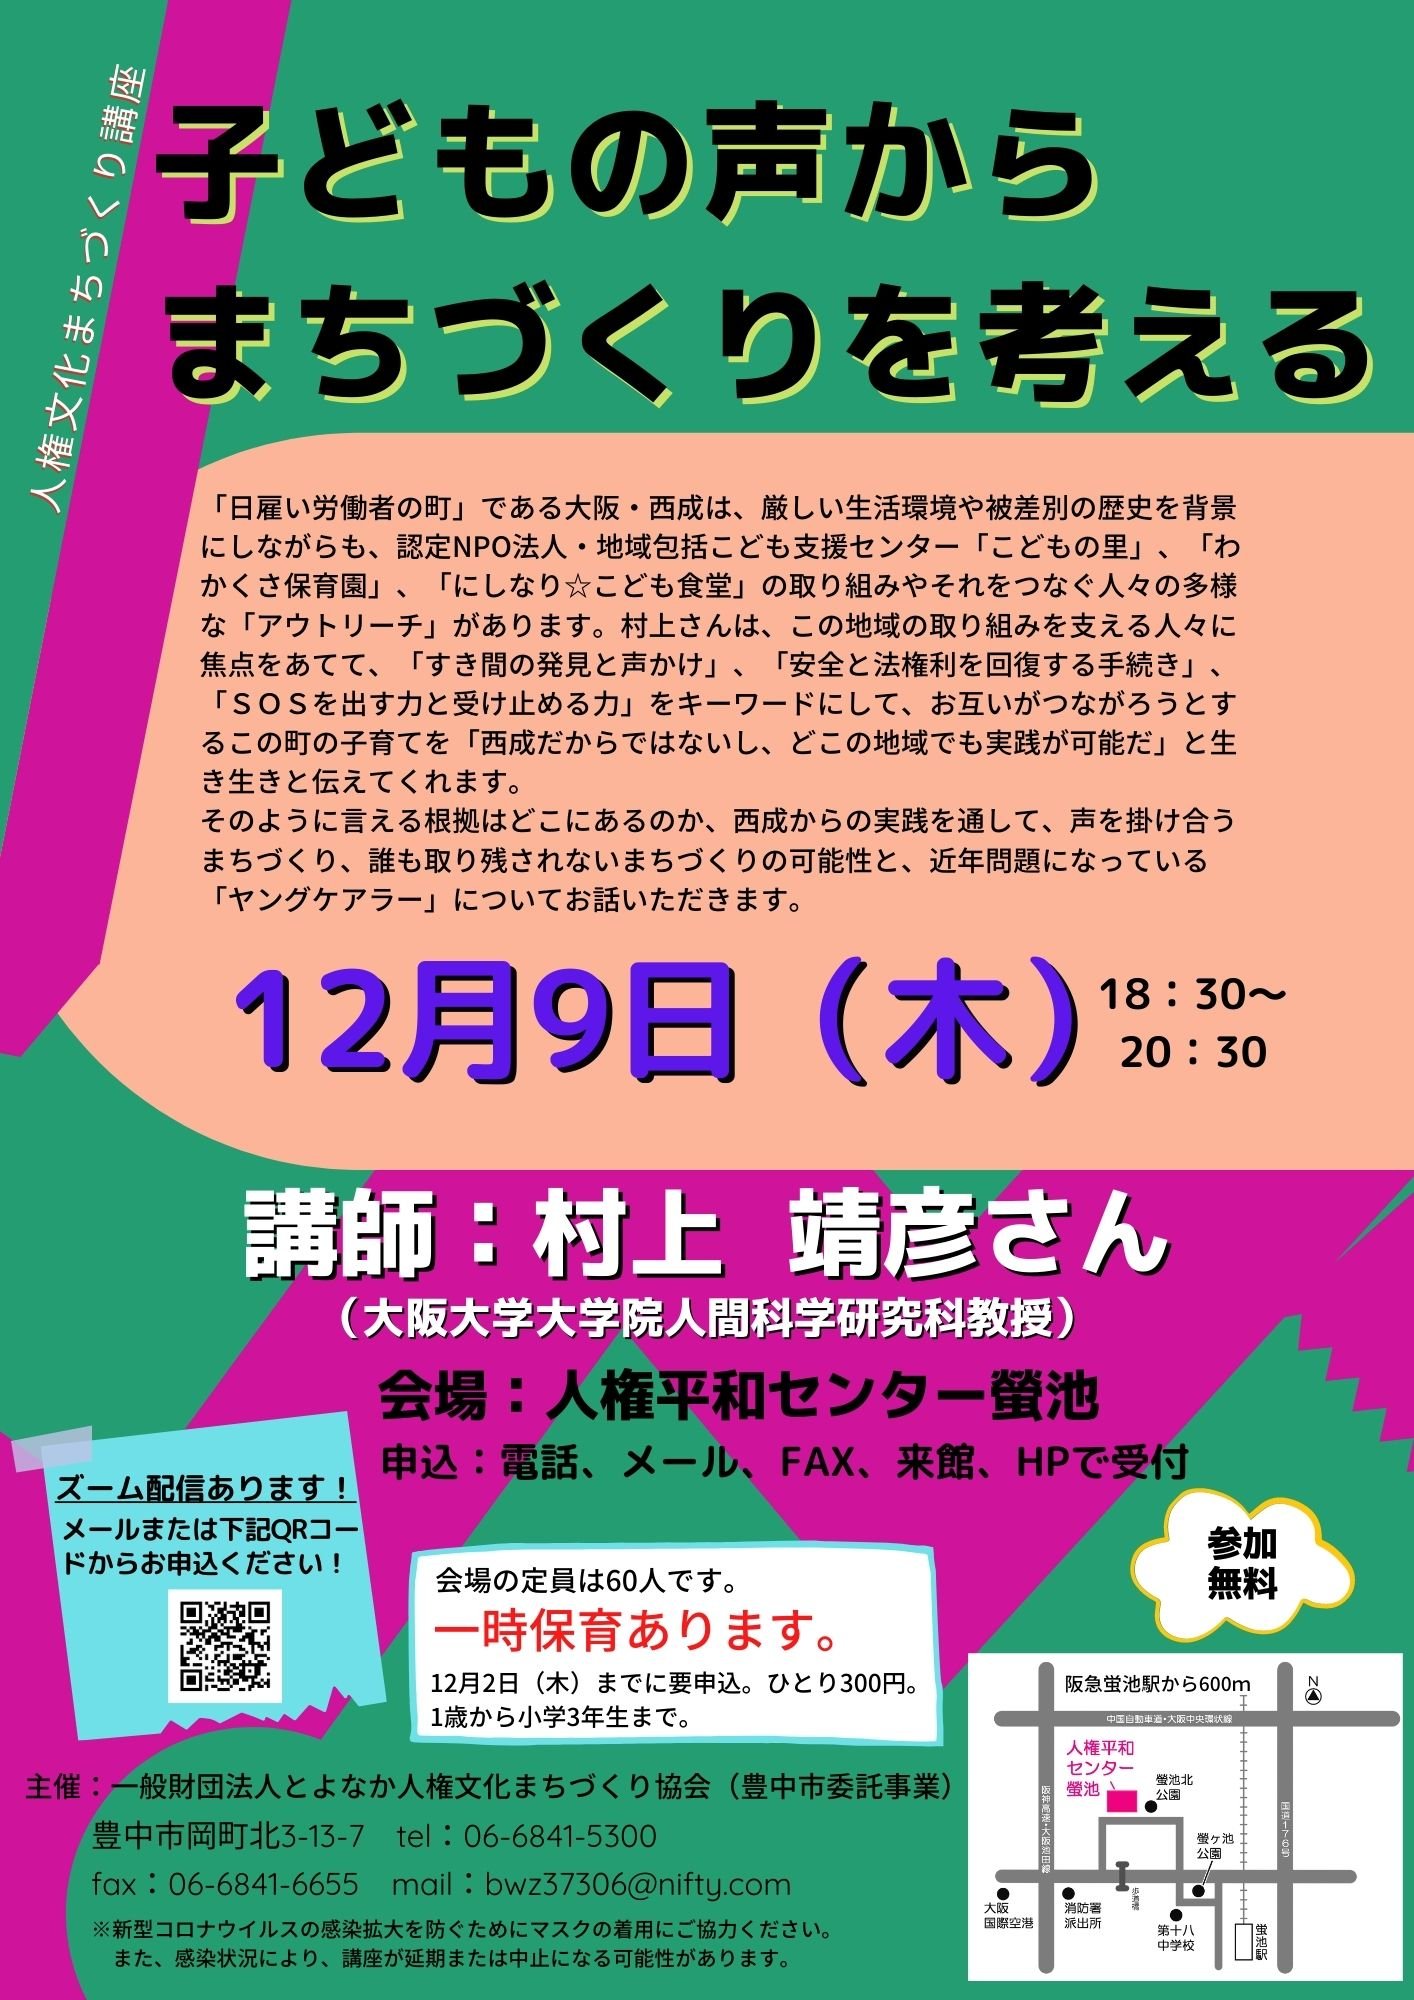 https://www.hurights.or.jp/japan/related-events/0ed075867f7f974f235ad834cac896c9c265d5fe.jpg